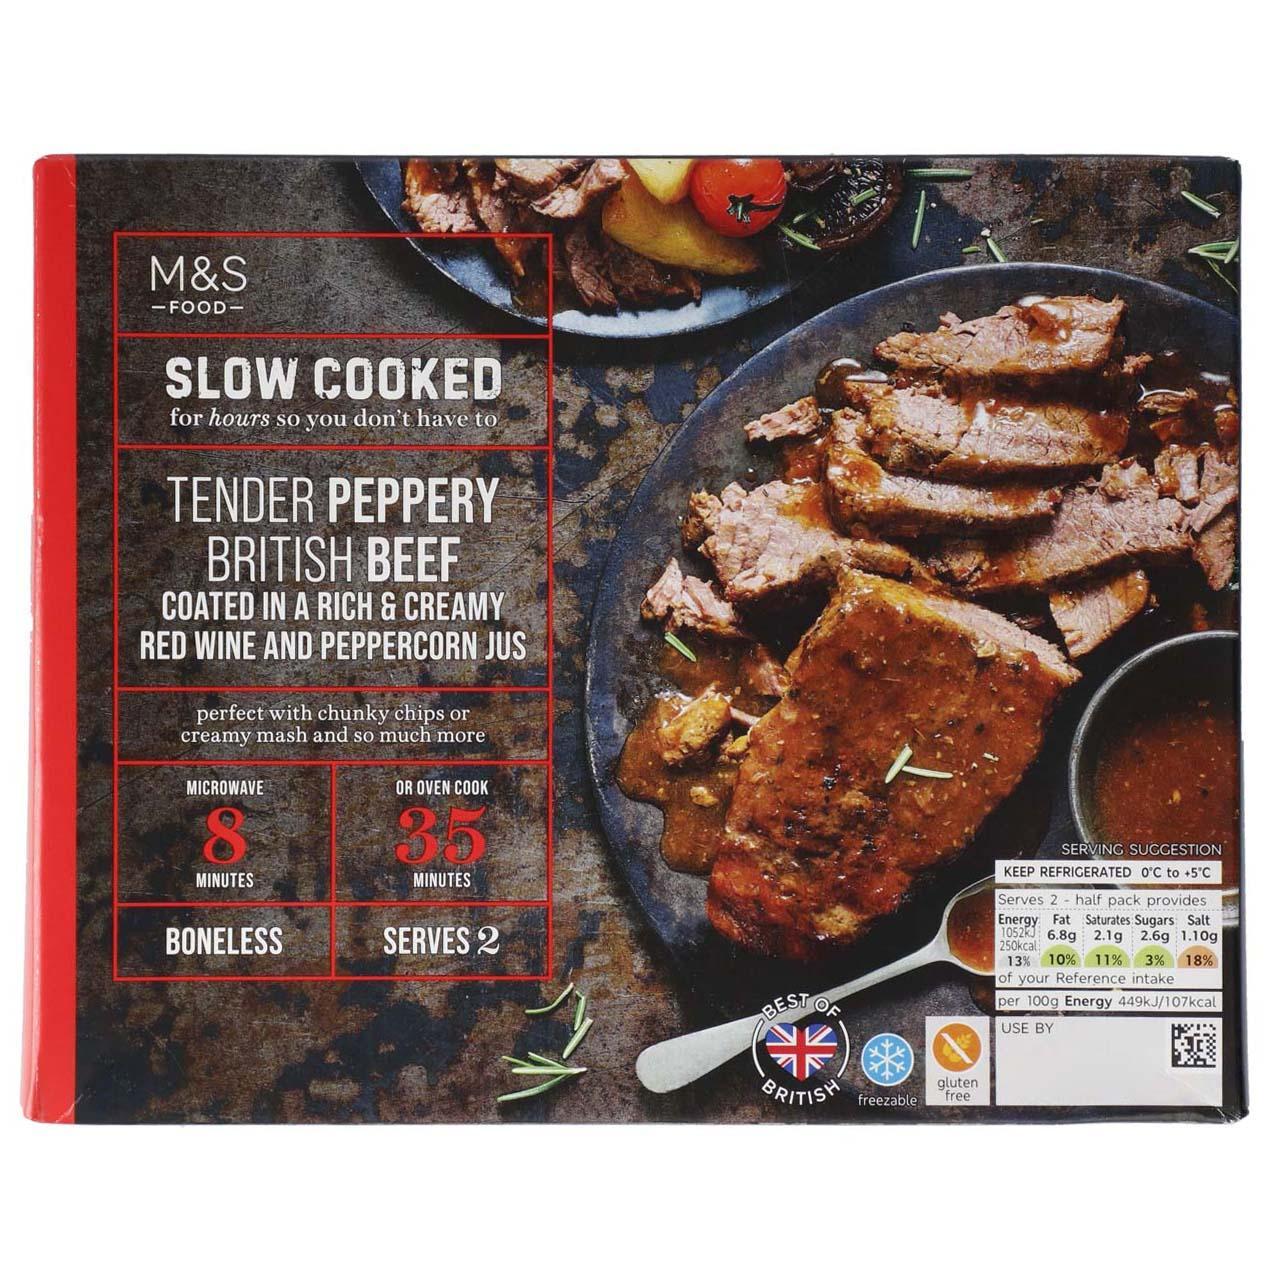 M&S British Slow Cooked Peppered Beef